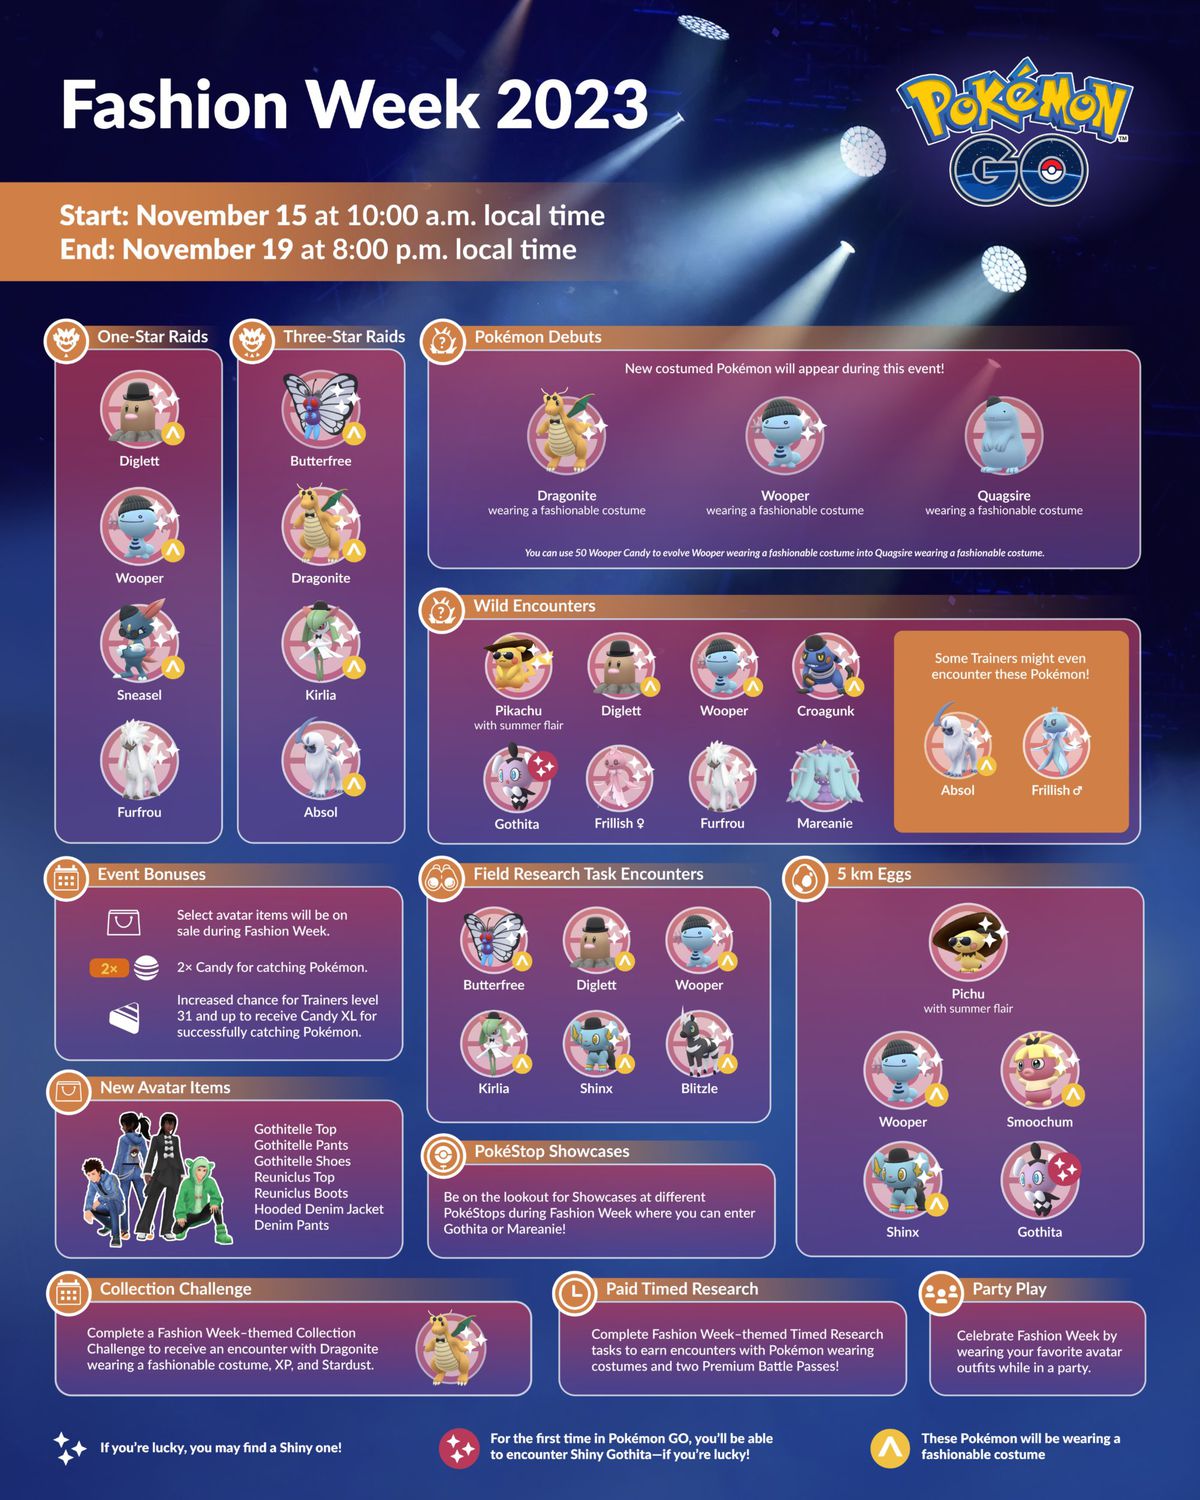 An infographic of all the perks and bonuses for Pokémon Go’s Fashion Week 2023 event